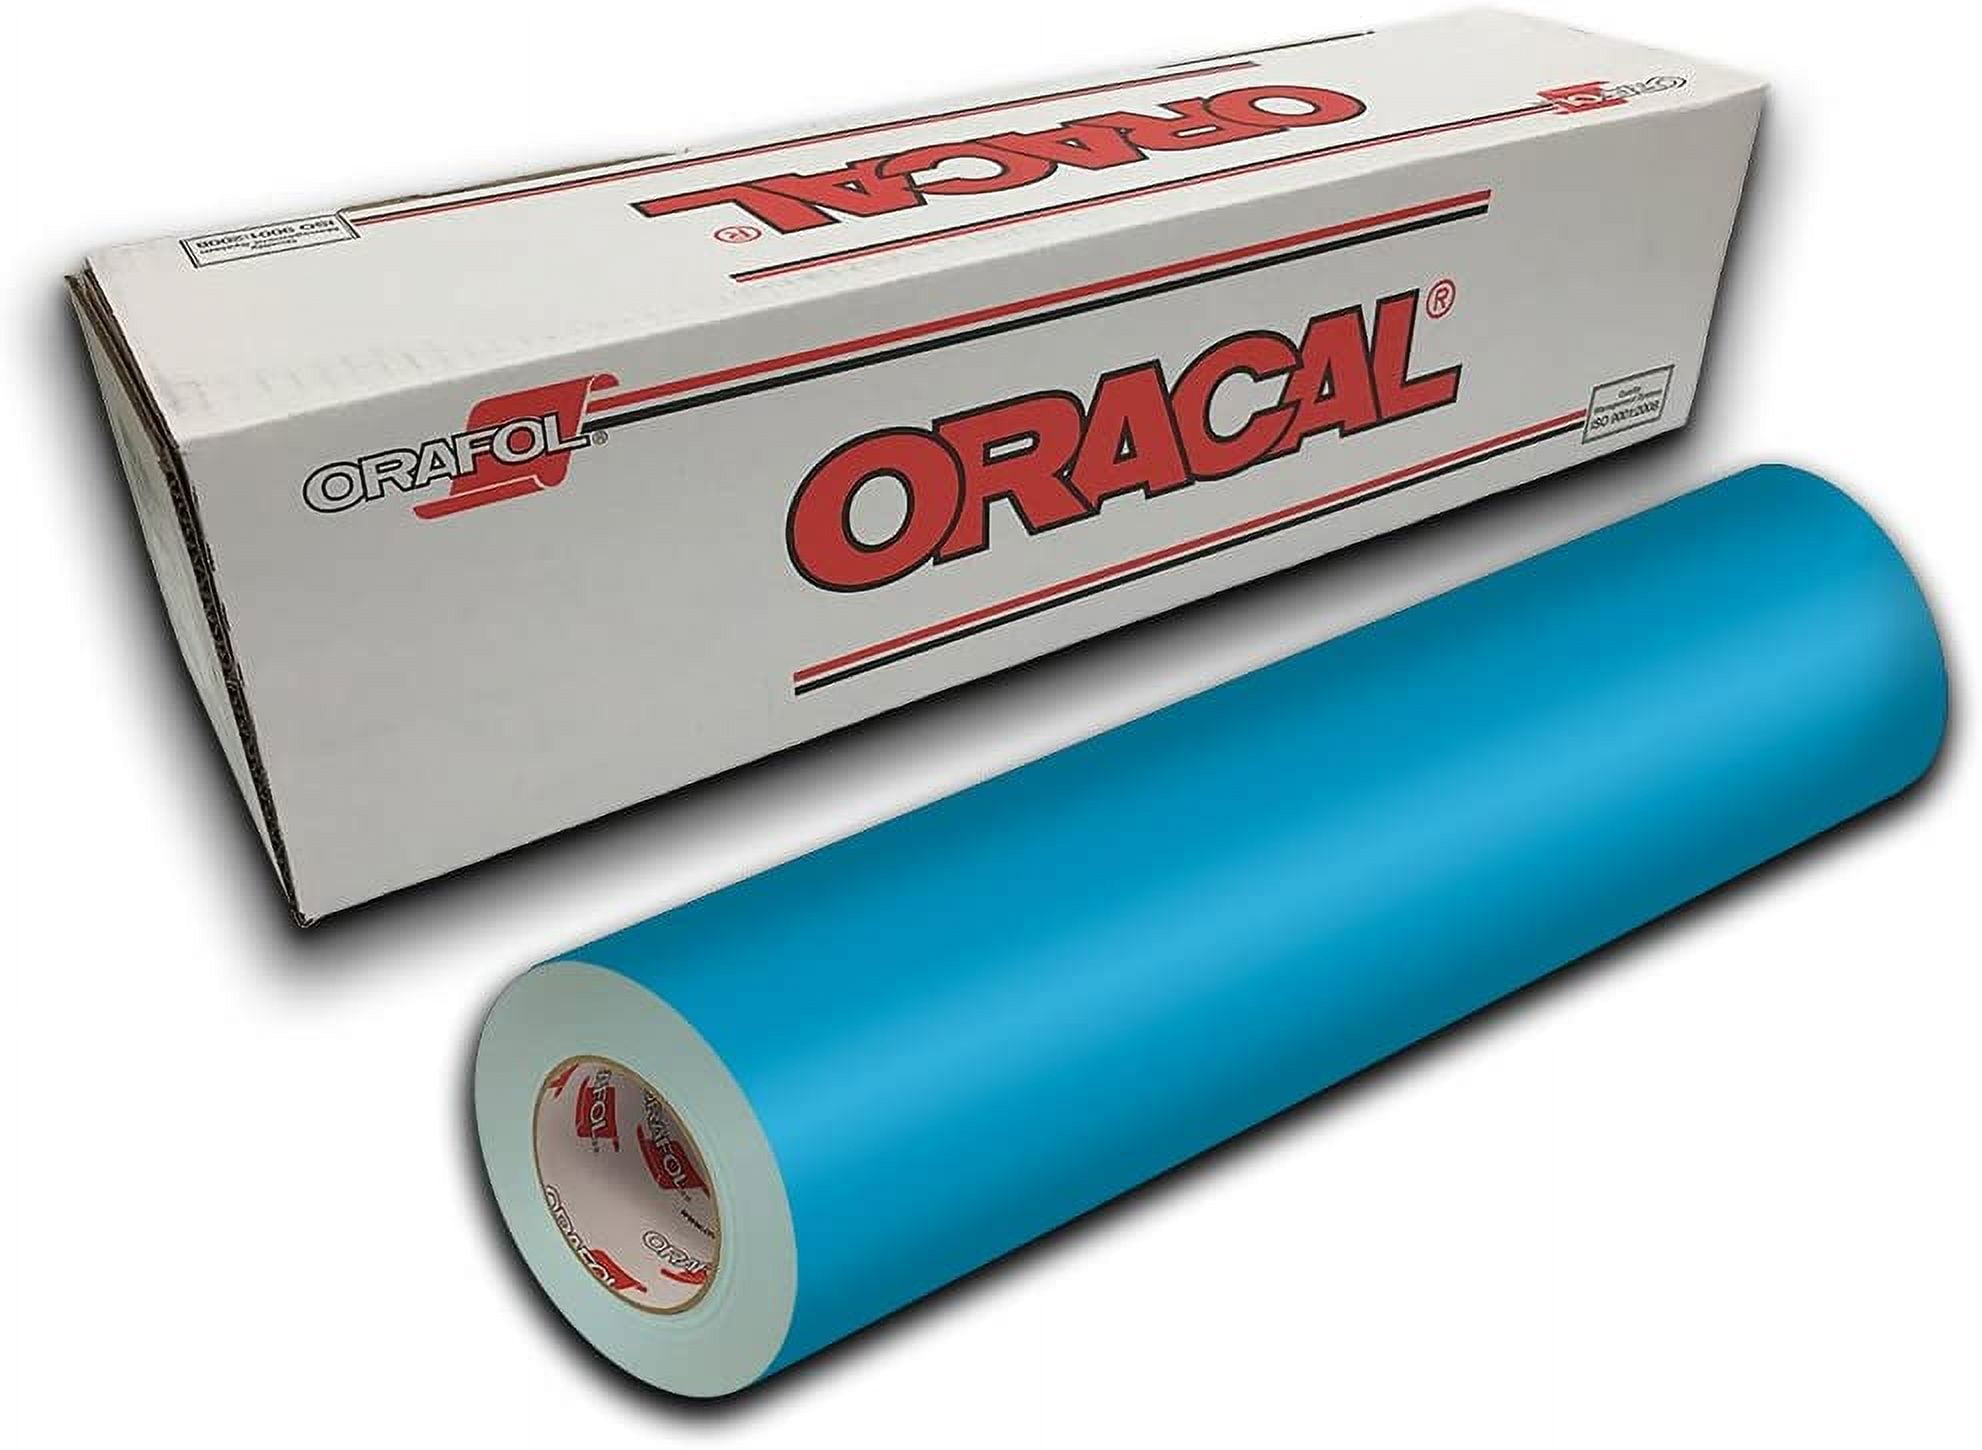 ORACAL® 651 Permanent Adhesive Vinyl - Uniquely Whynot Craft